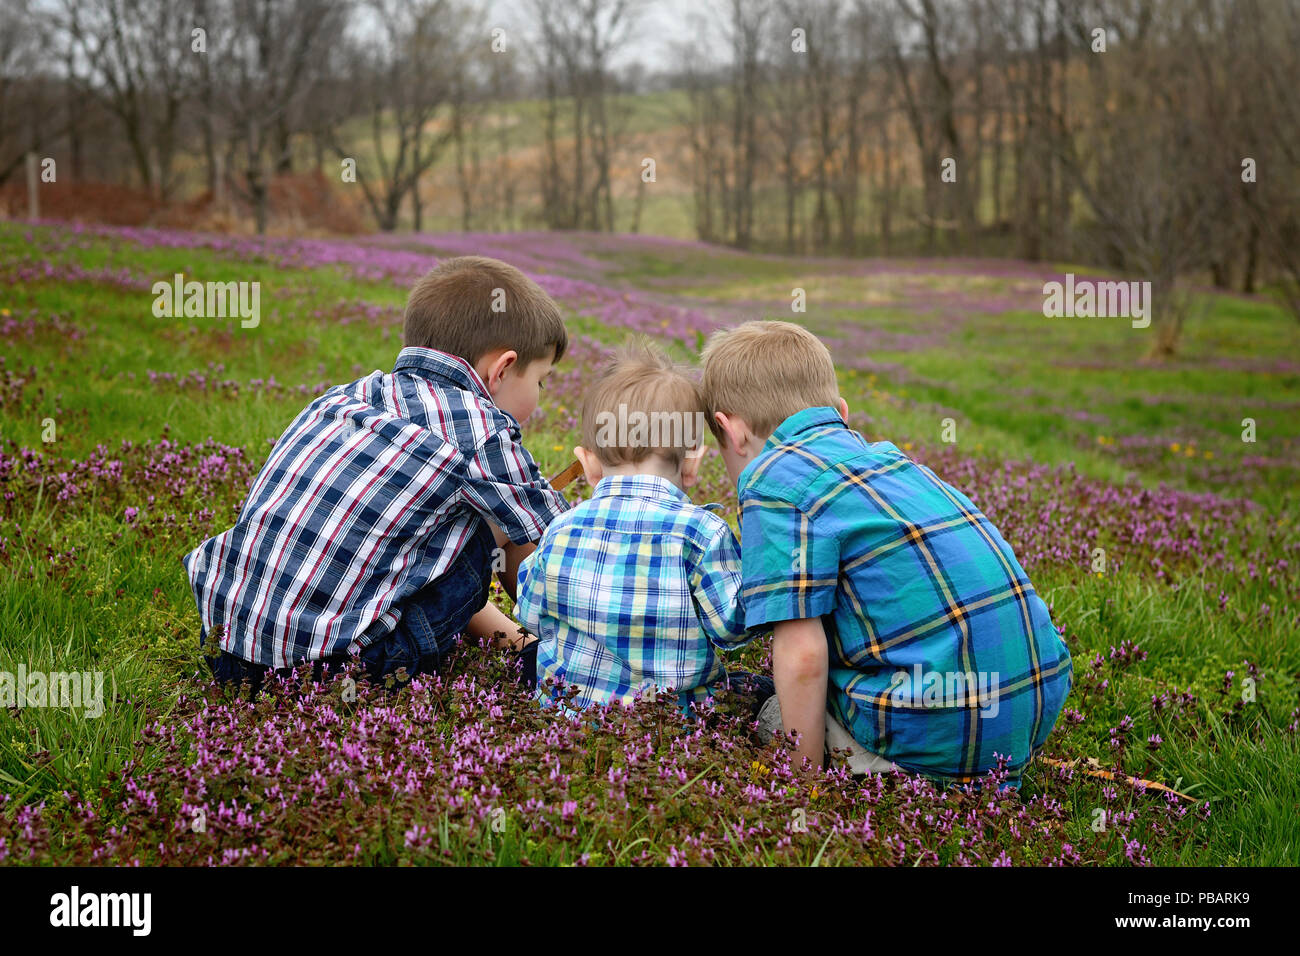 Three brothers together portrait Stock Photo